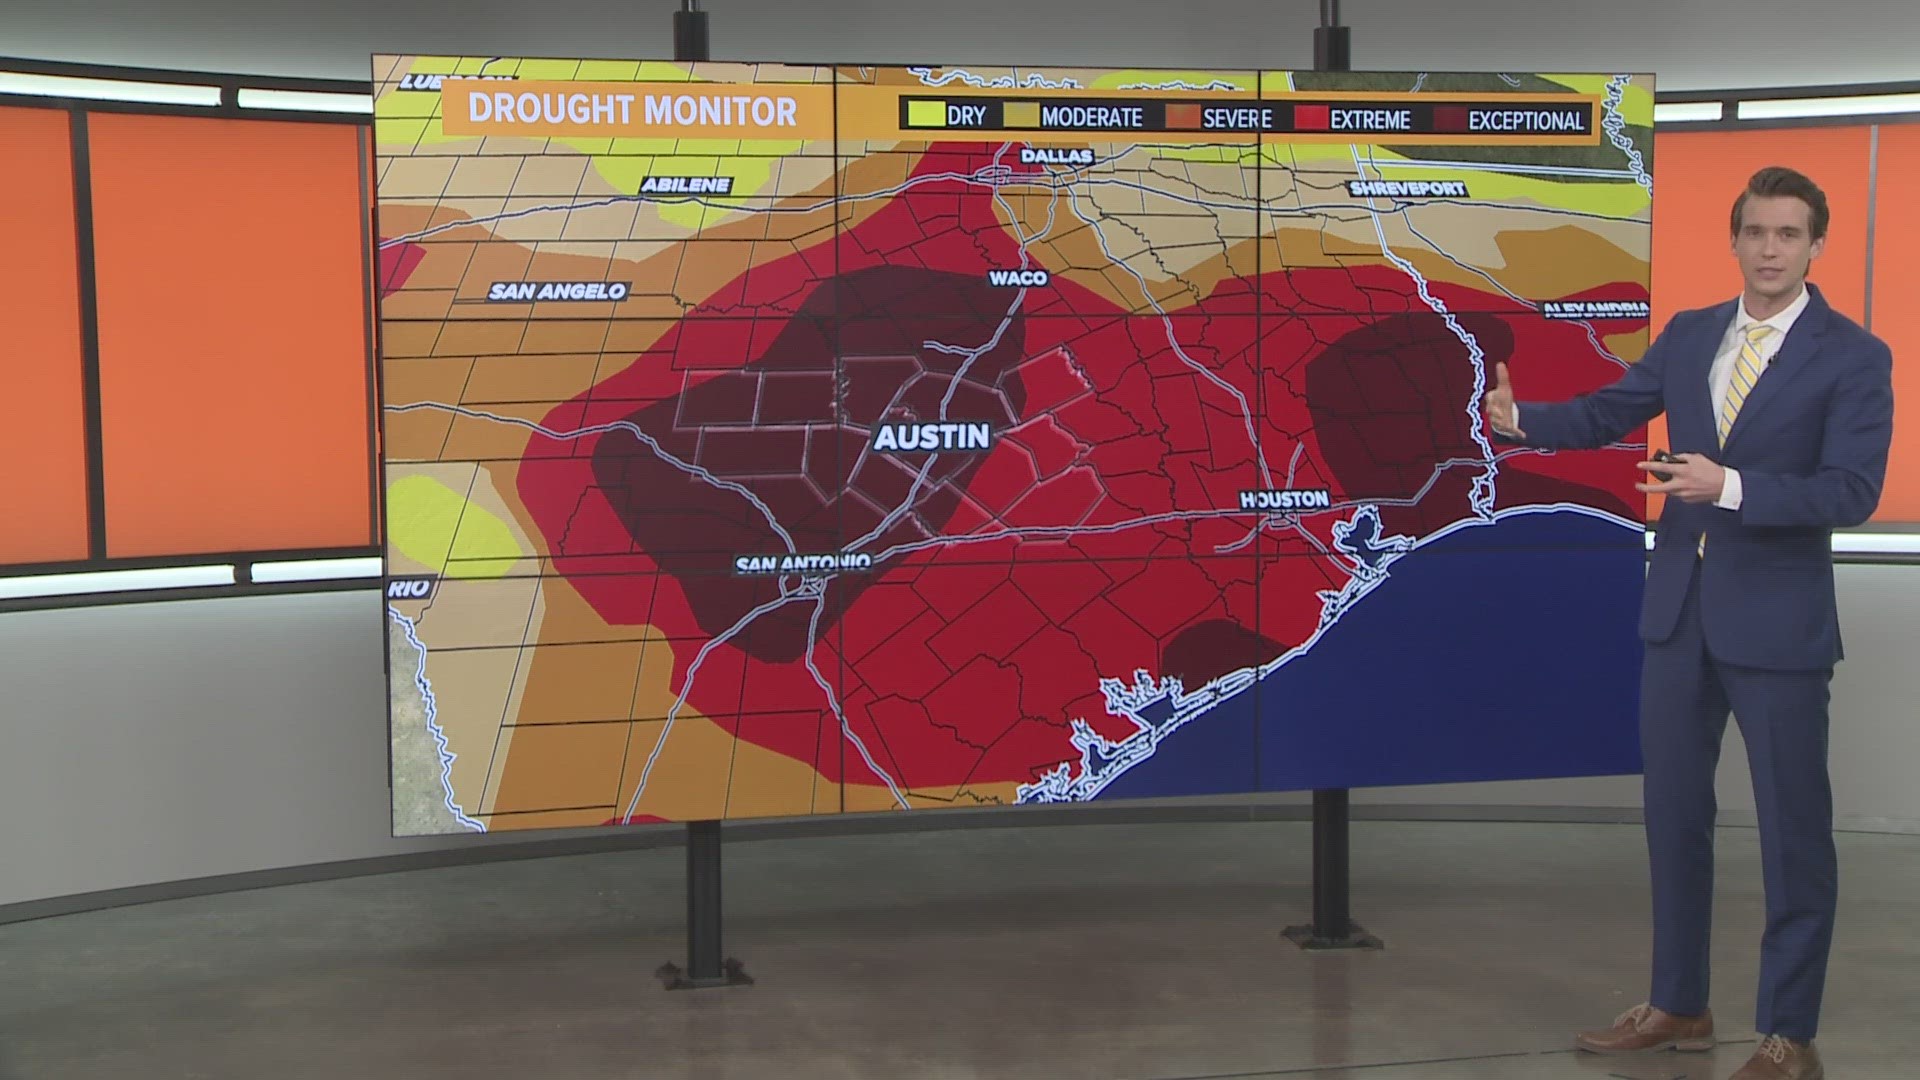 KVUE Meteorologist Shane Hinton has a breakdown of the latest drought monitor, released on Thursday, Aug. 24.